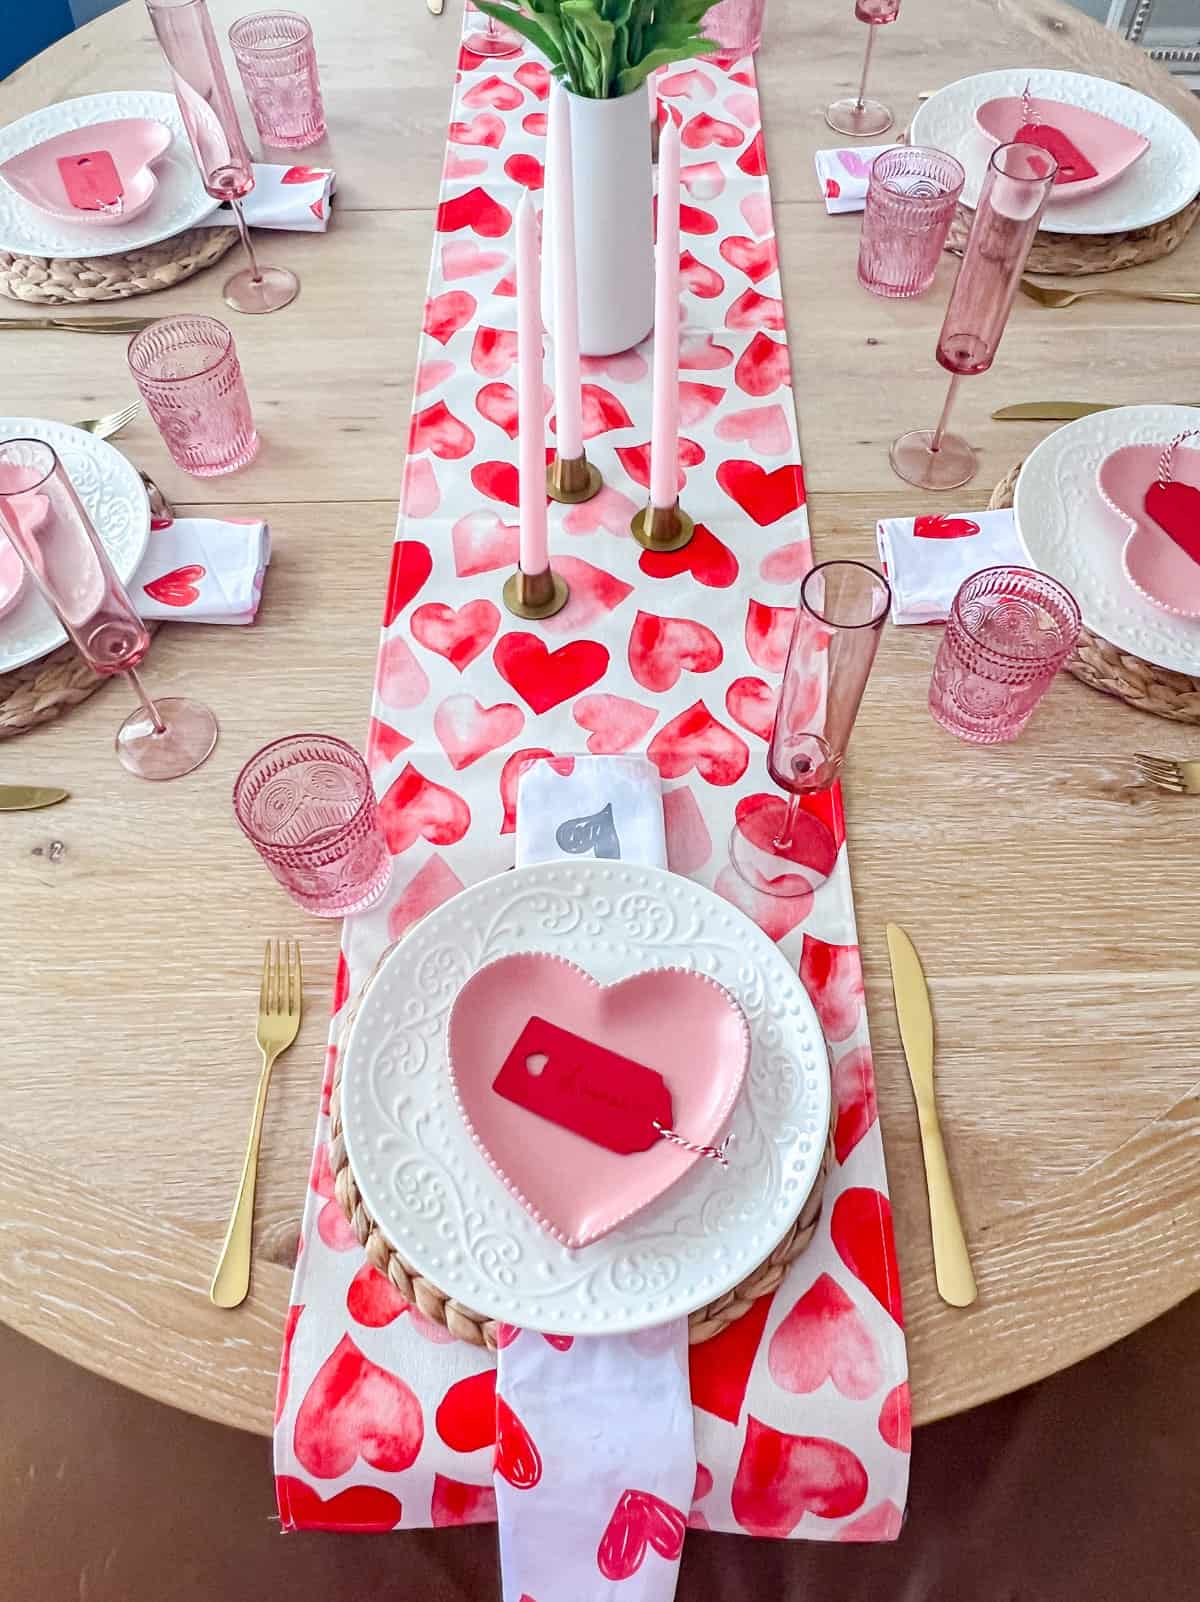 Pink and red tablescape idea with heart table runner.